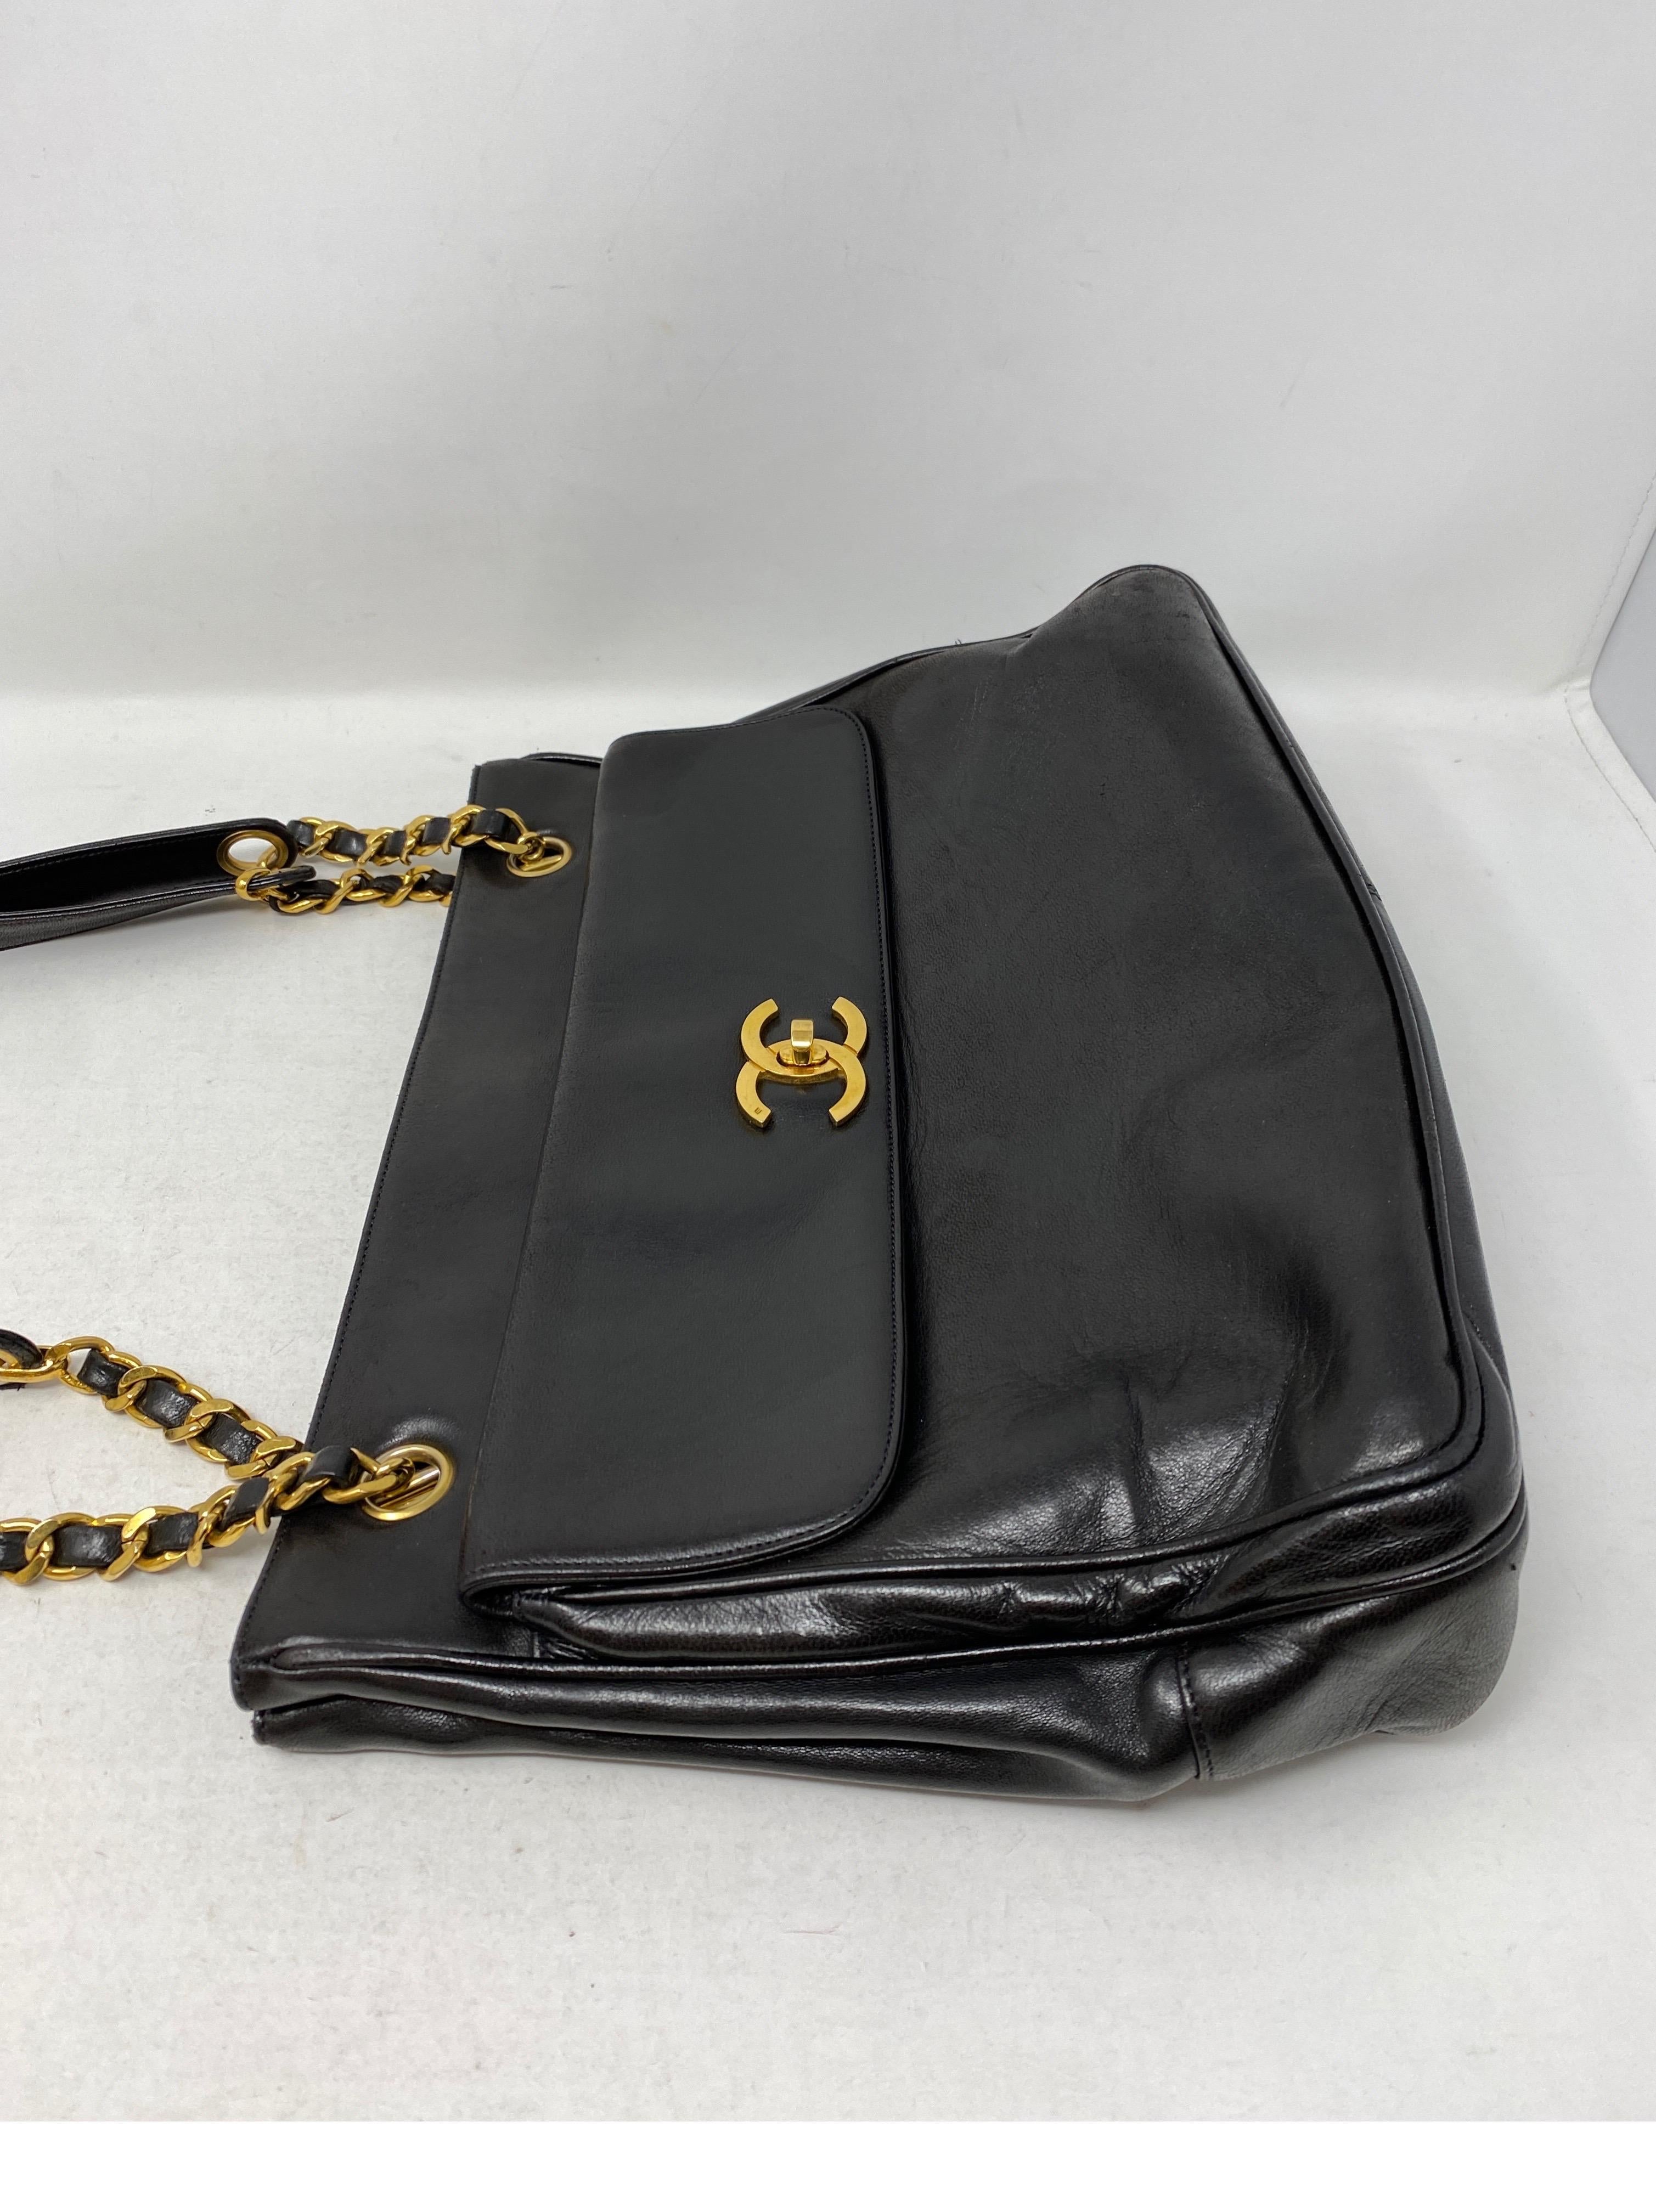 1990s Chanel Black Leather Tote Bag 4